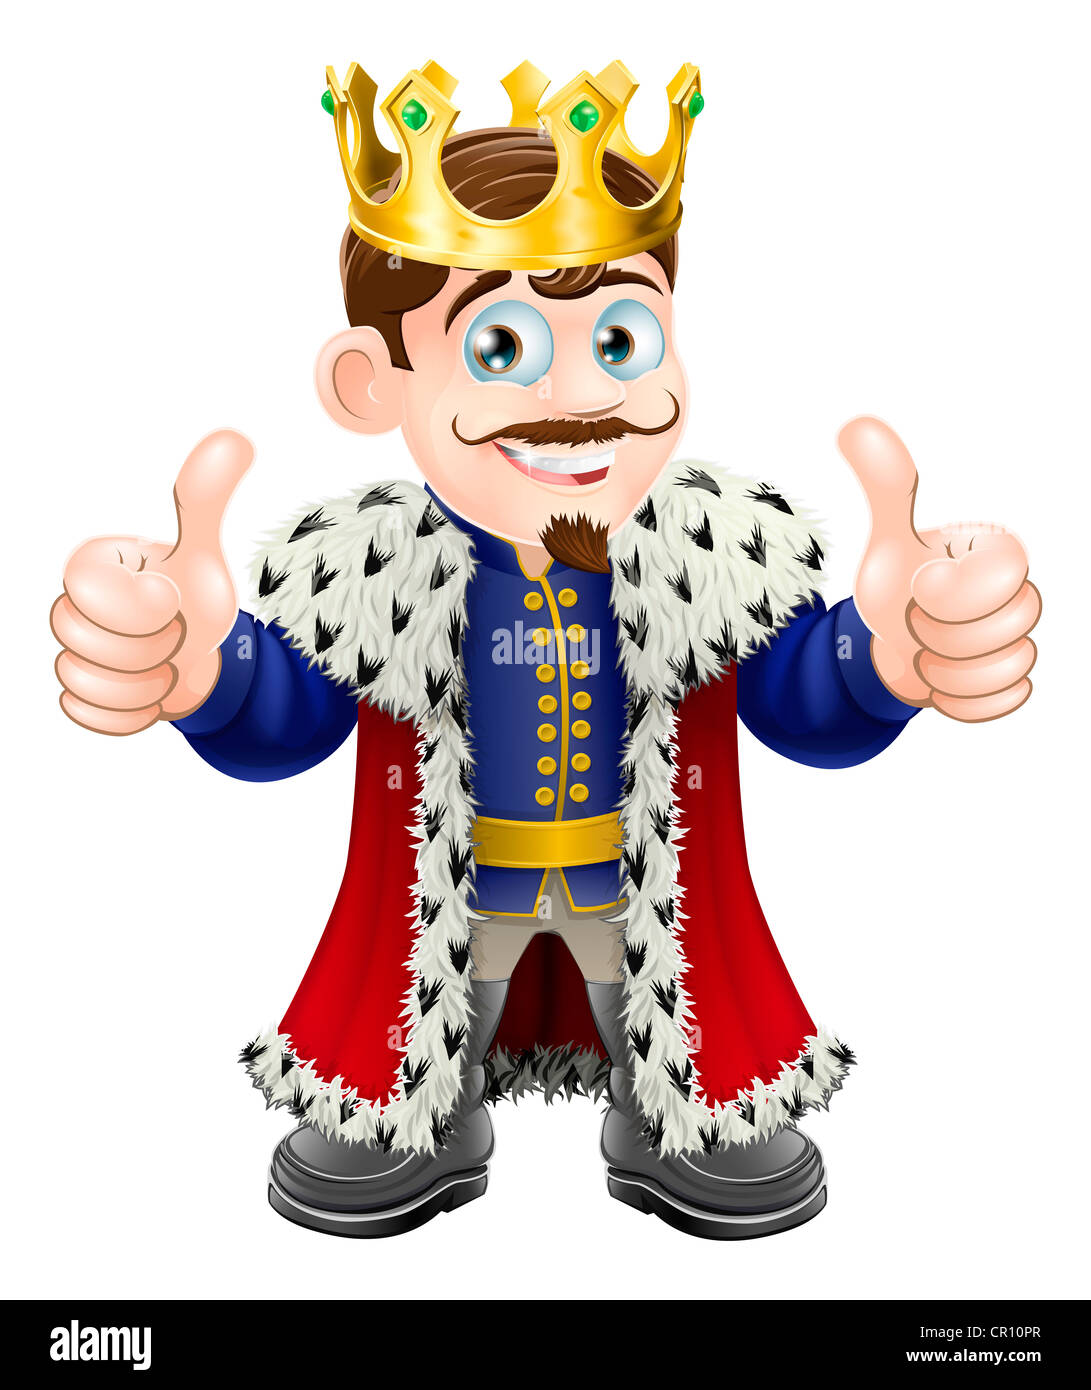 Cartoon illustration of a cute king with crown and cape giving a double thumbs up Stock Photo